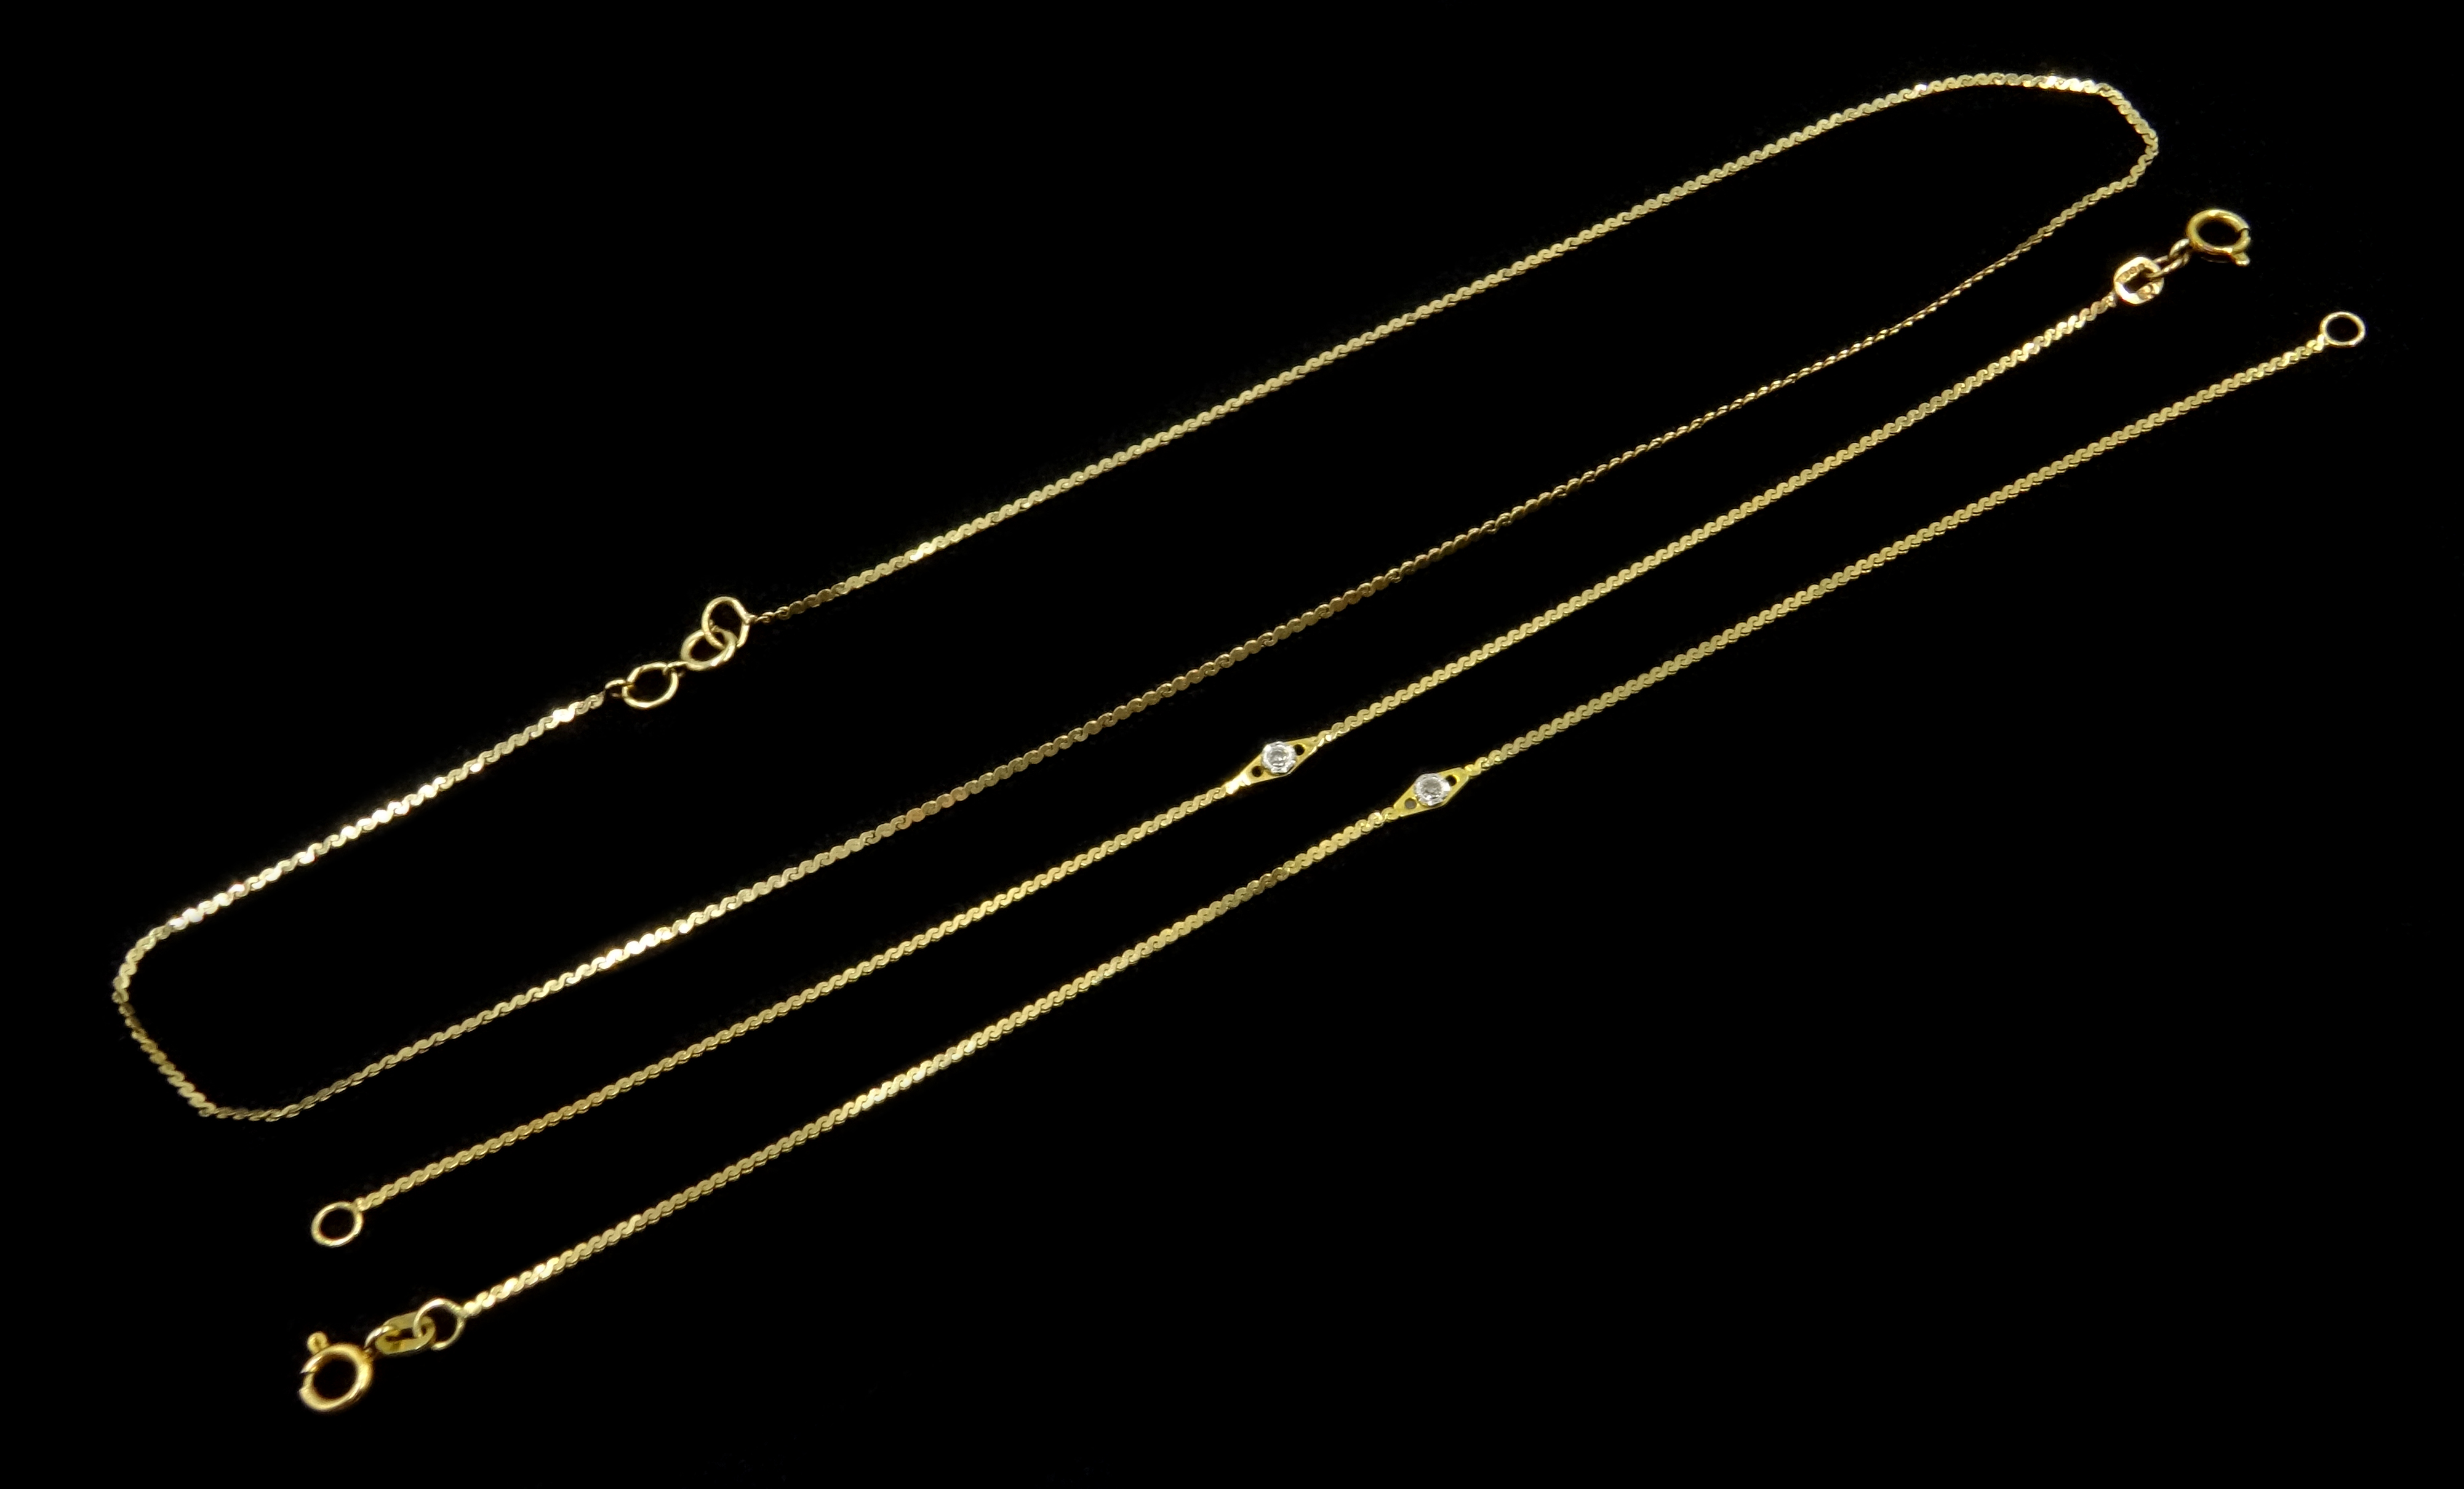 Two 9ct gold chain bracelets each set with a single diamond and a 9ct gold chain necklace 4gm